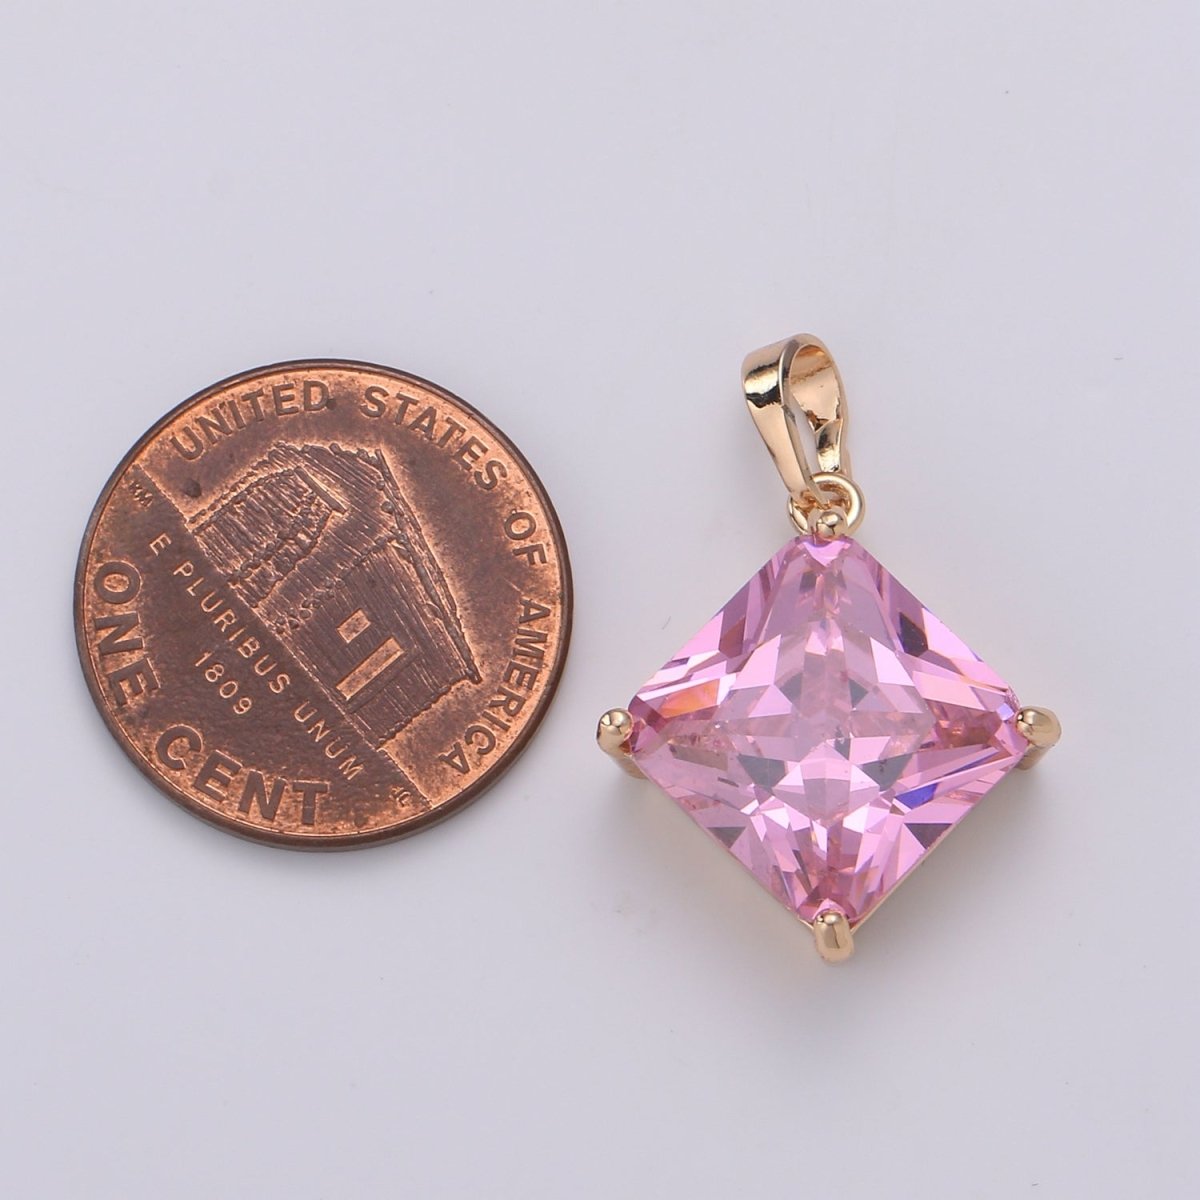 Gemstone Rhombus Charm, Pink Solitaire Cz Pendant, 25x15mm, 18k Gold Filled Pendnt Dangle Jewelry, Necklace Earring Valentine Gift J-113 - DLUXCA